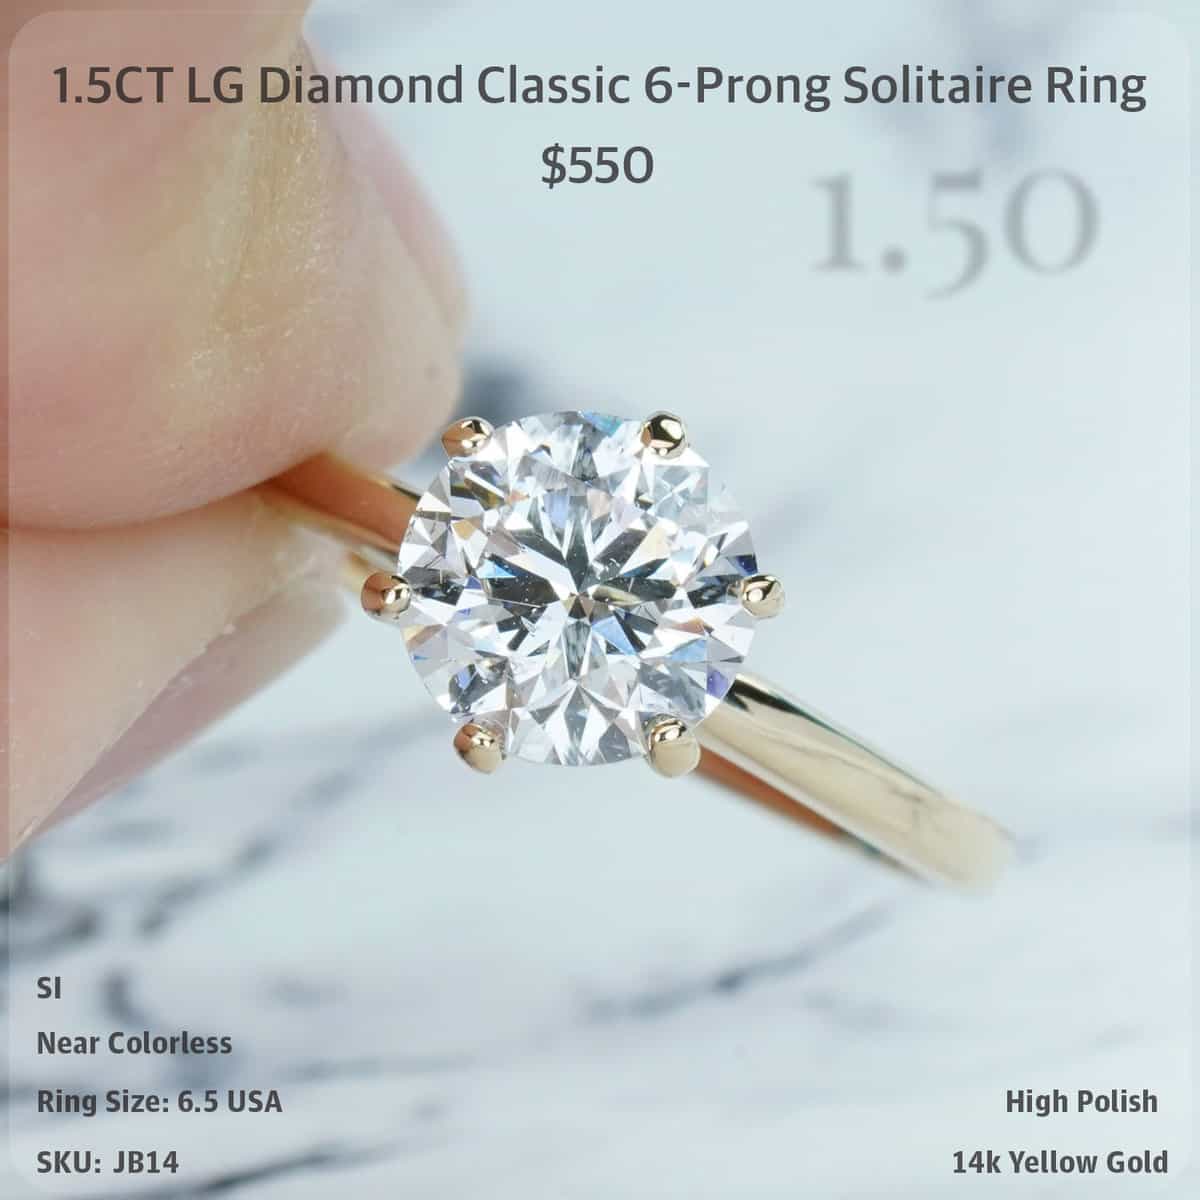 1.5CT LG Diamond Classic 6-Prong Solitaire Ring